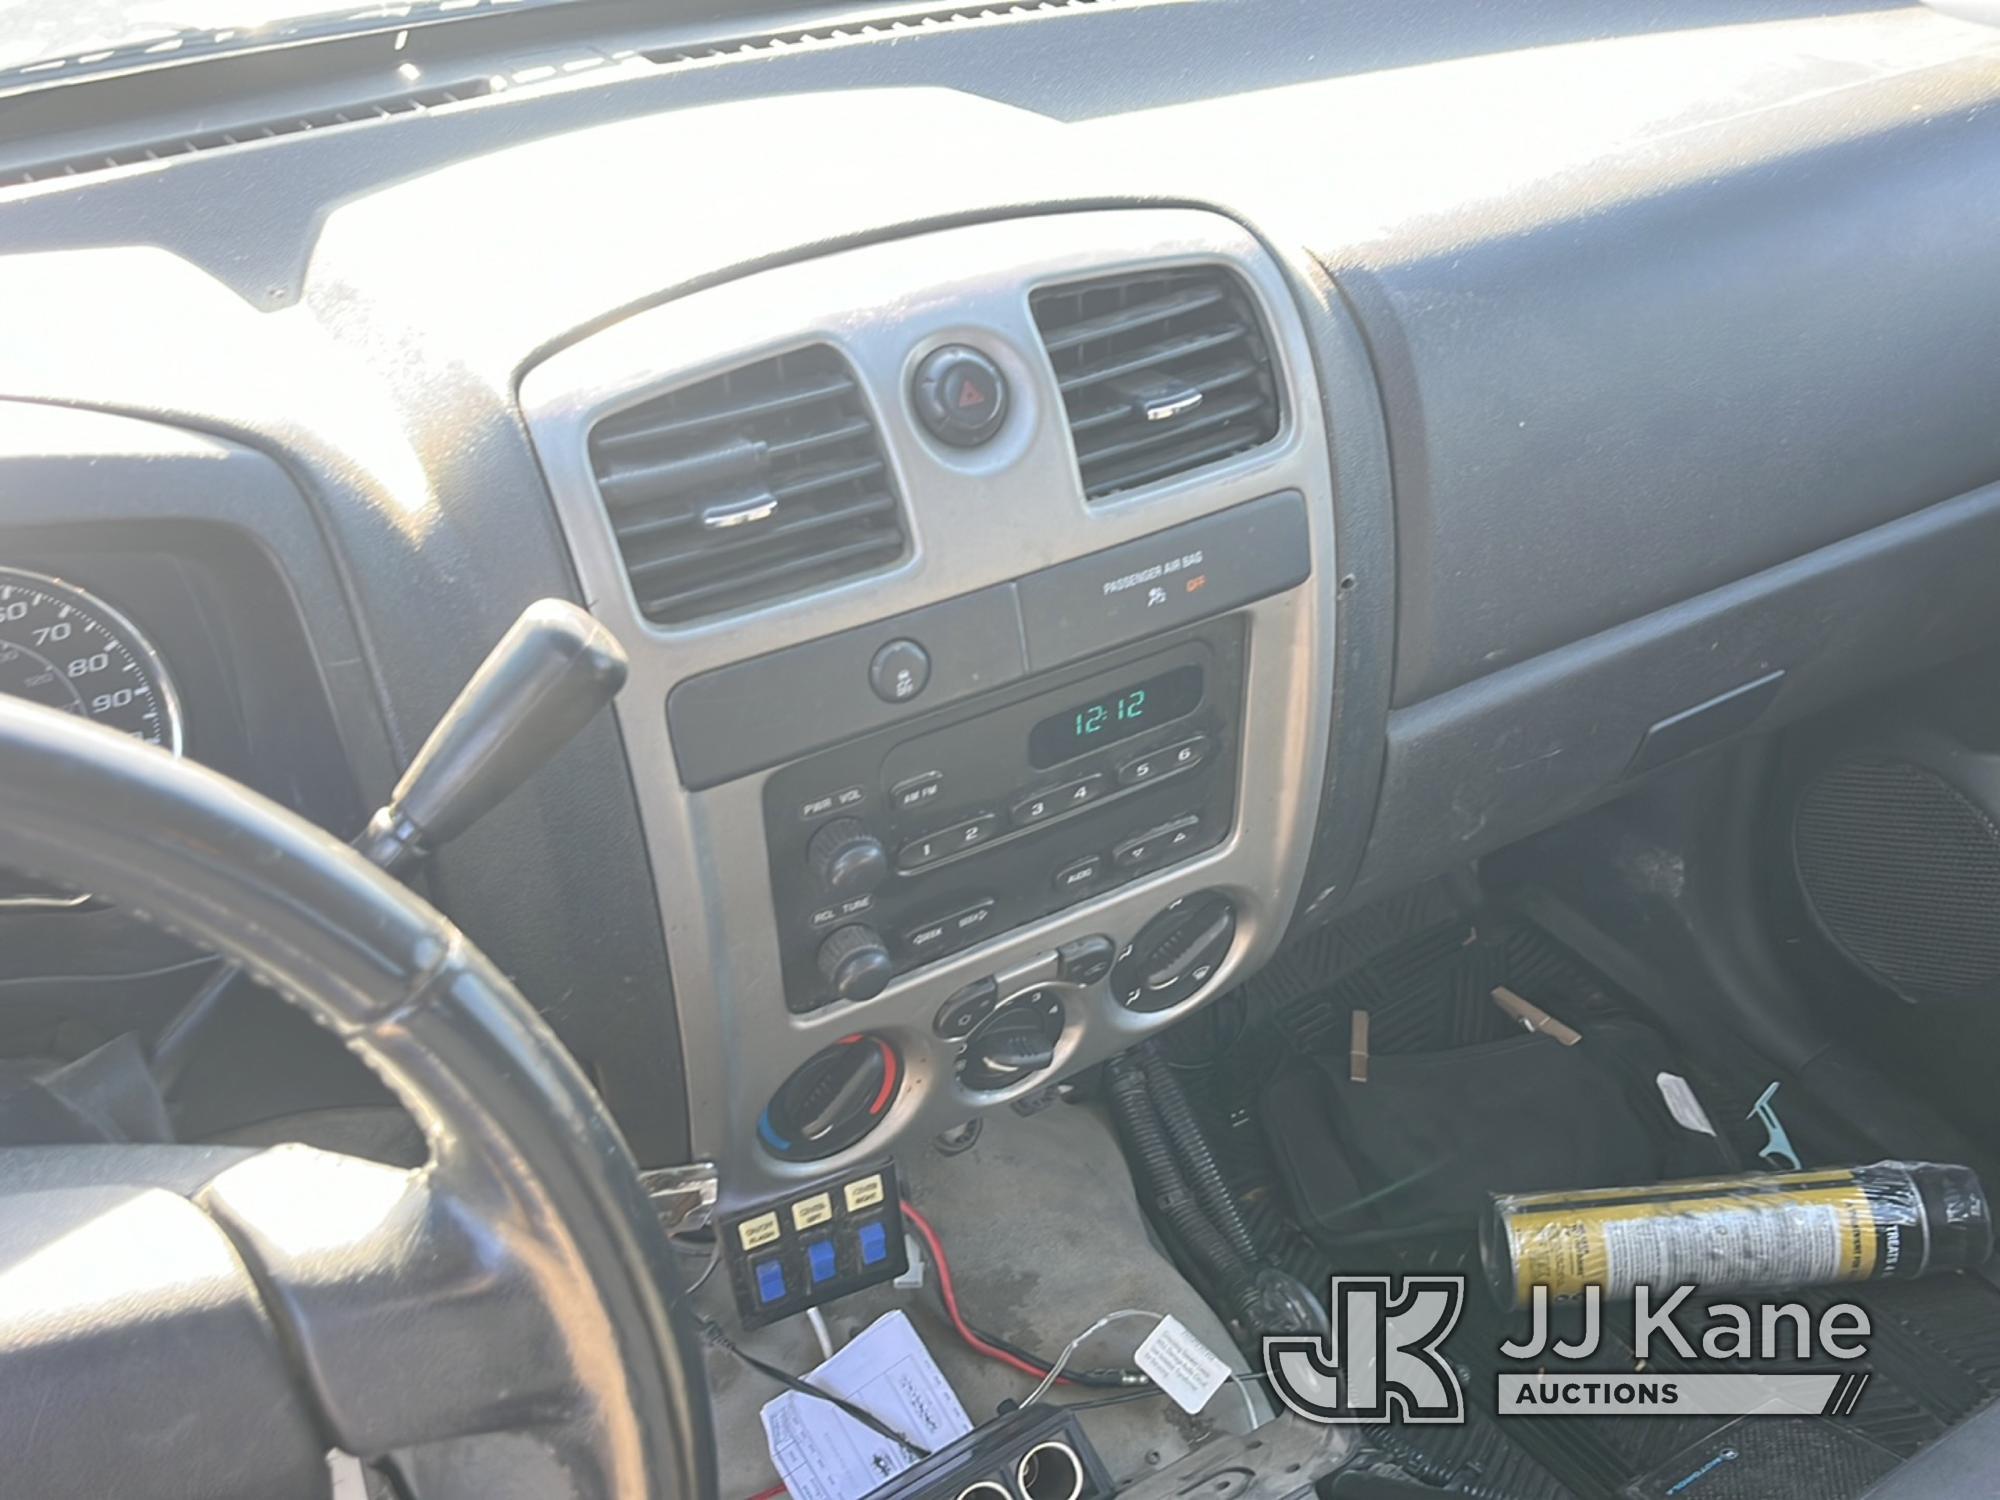 (Conway, AR) 2012 Chevrolet Colorado Pickup Truck Runs & Moves) (Jump to Start) (Check Engine Light